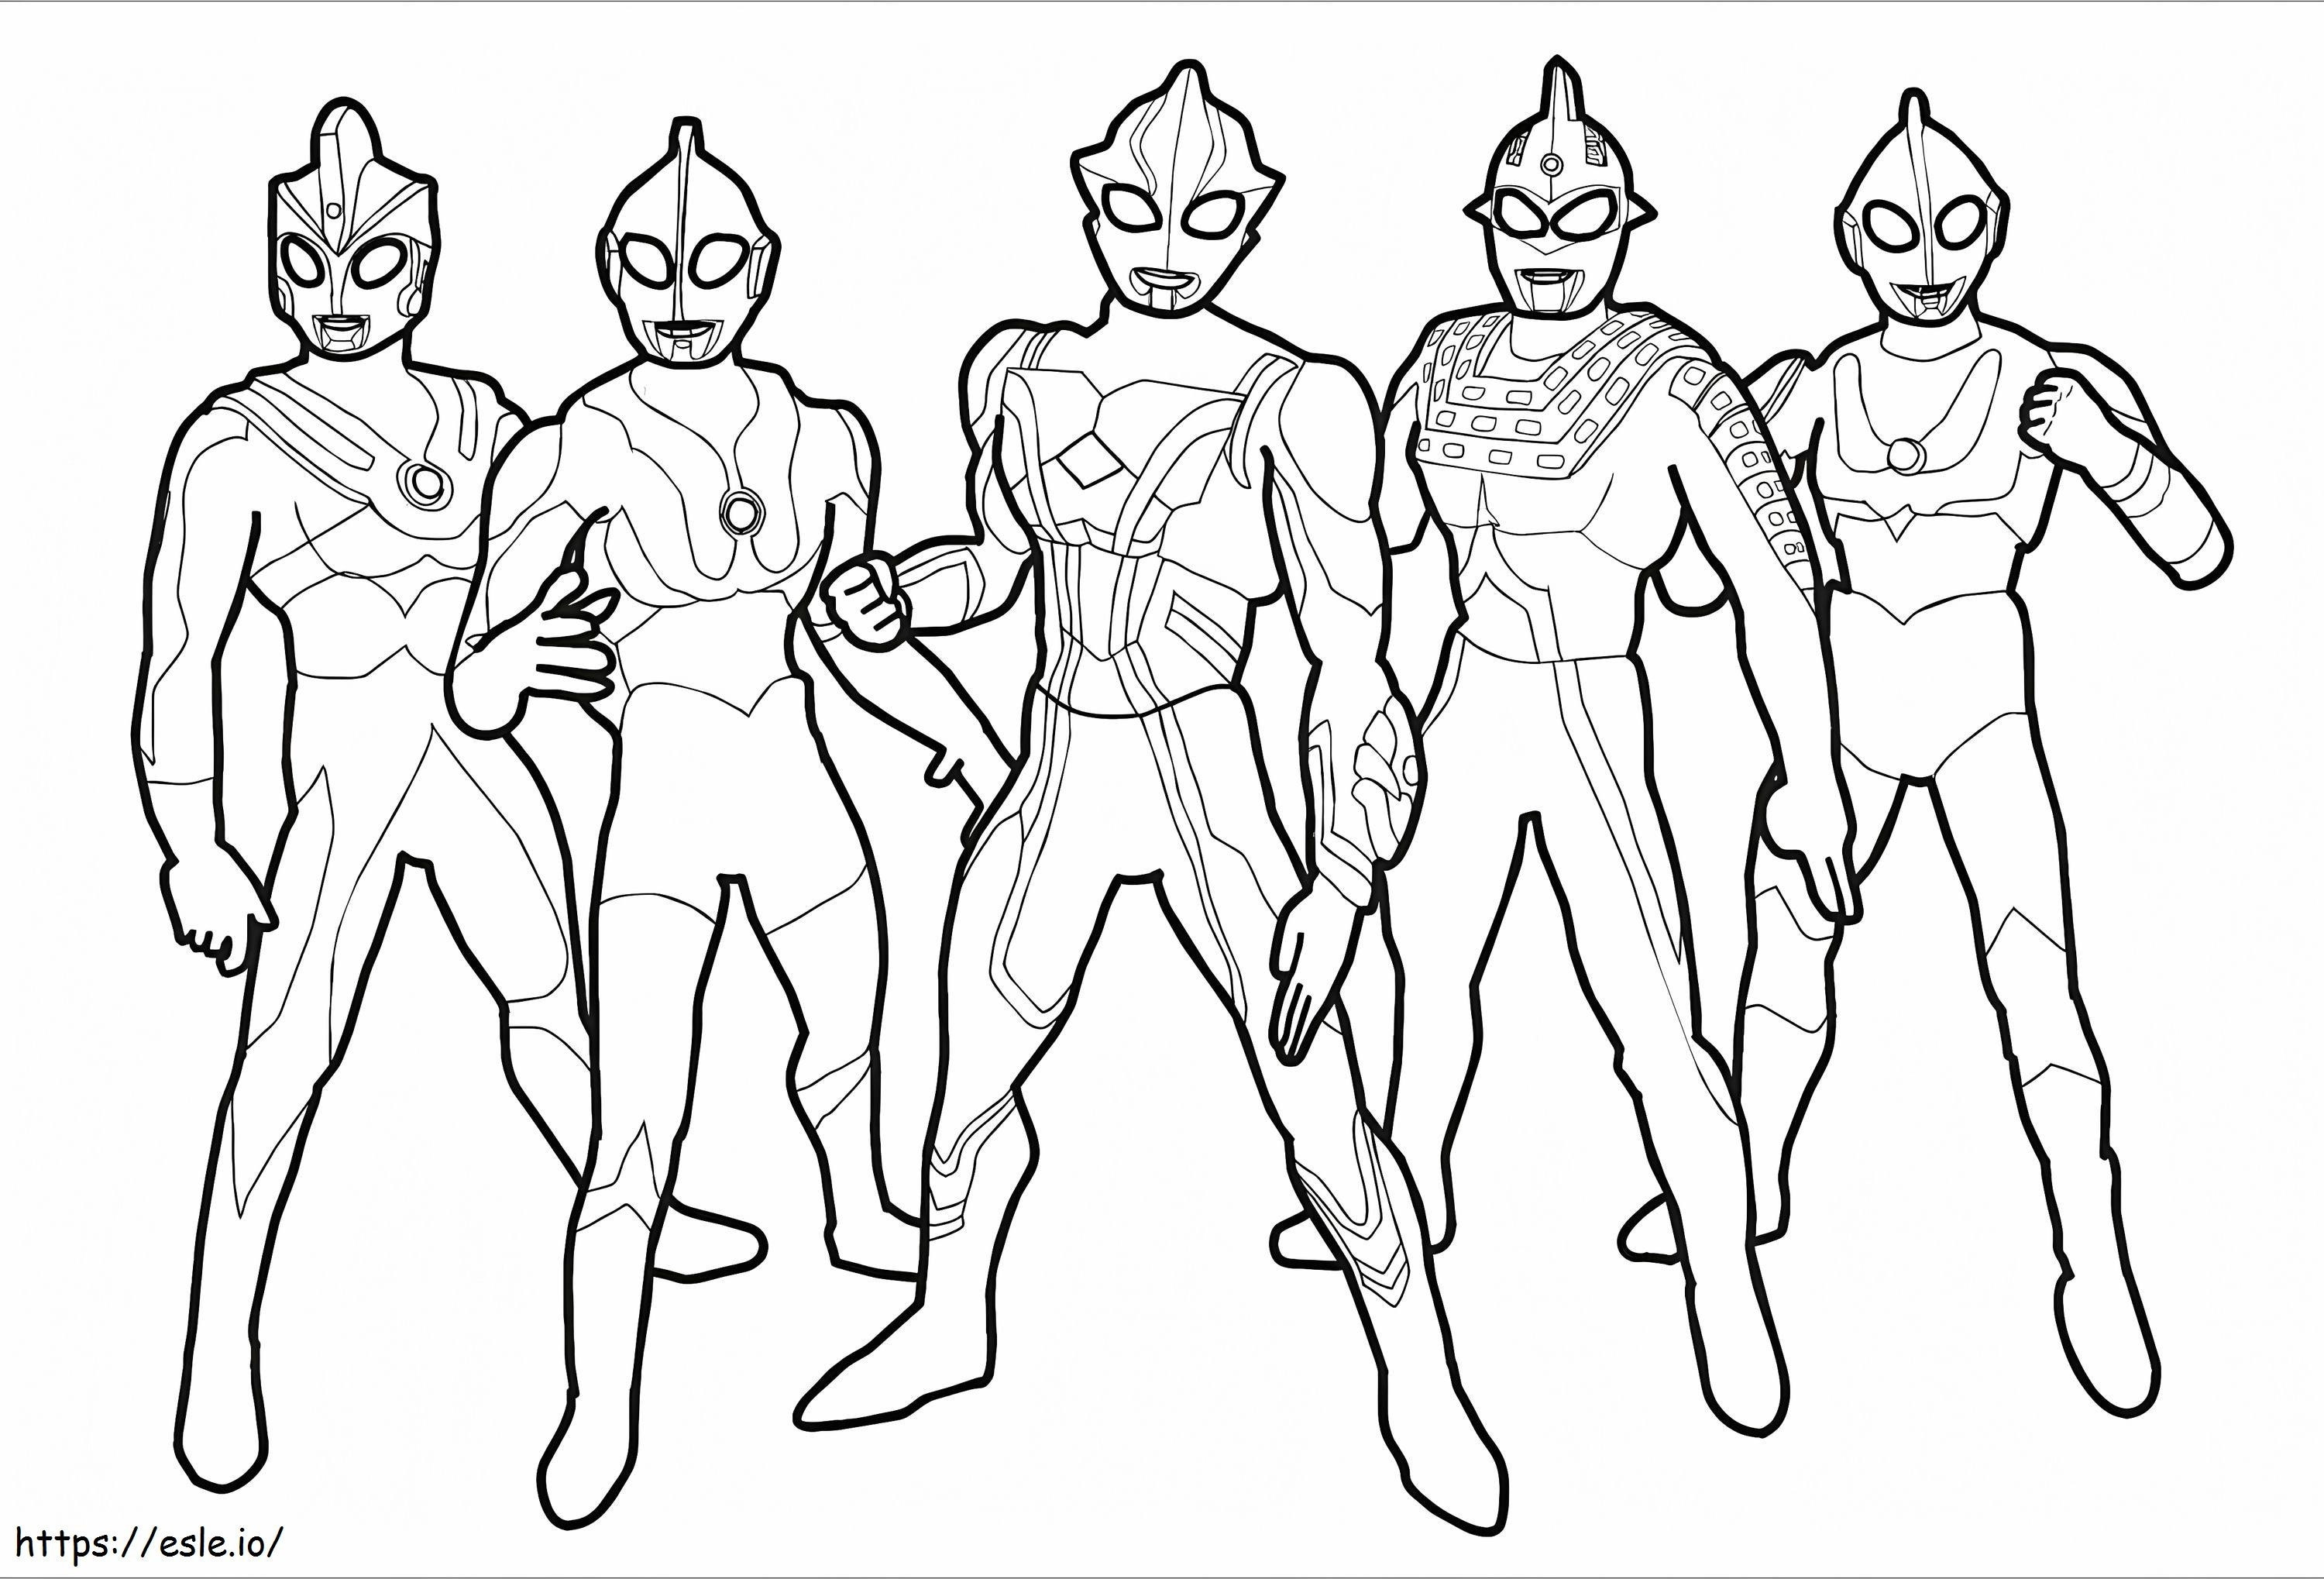 Ultraman Team coloring page